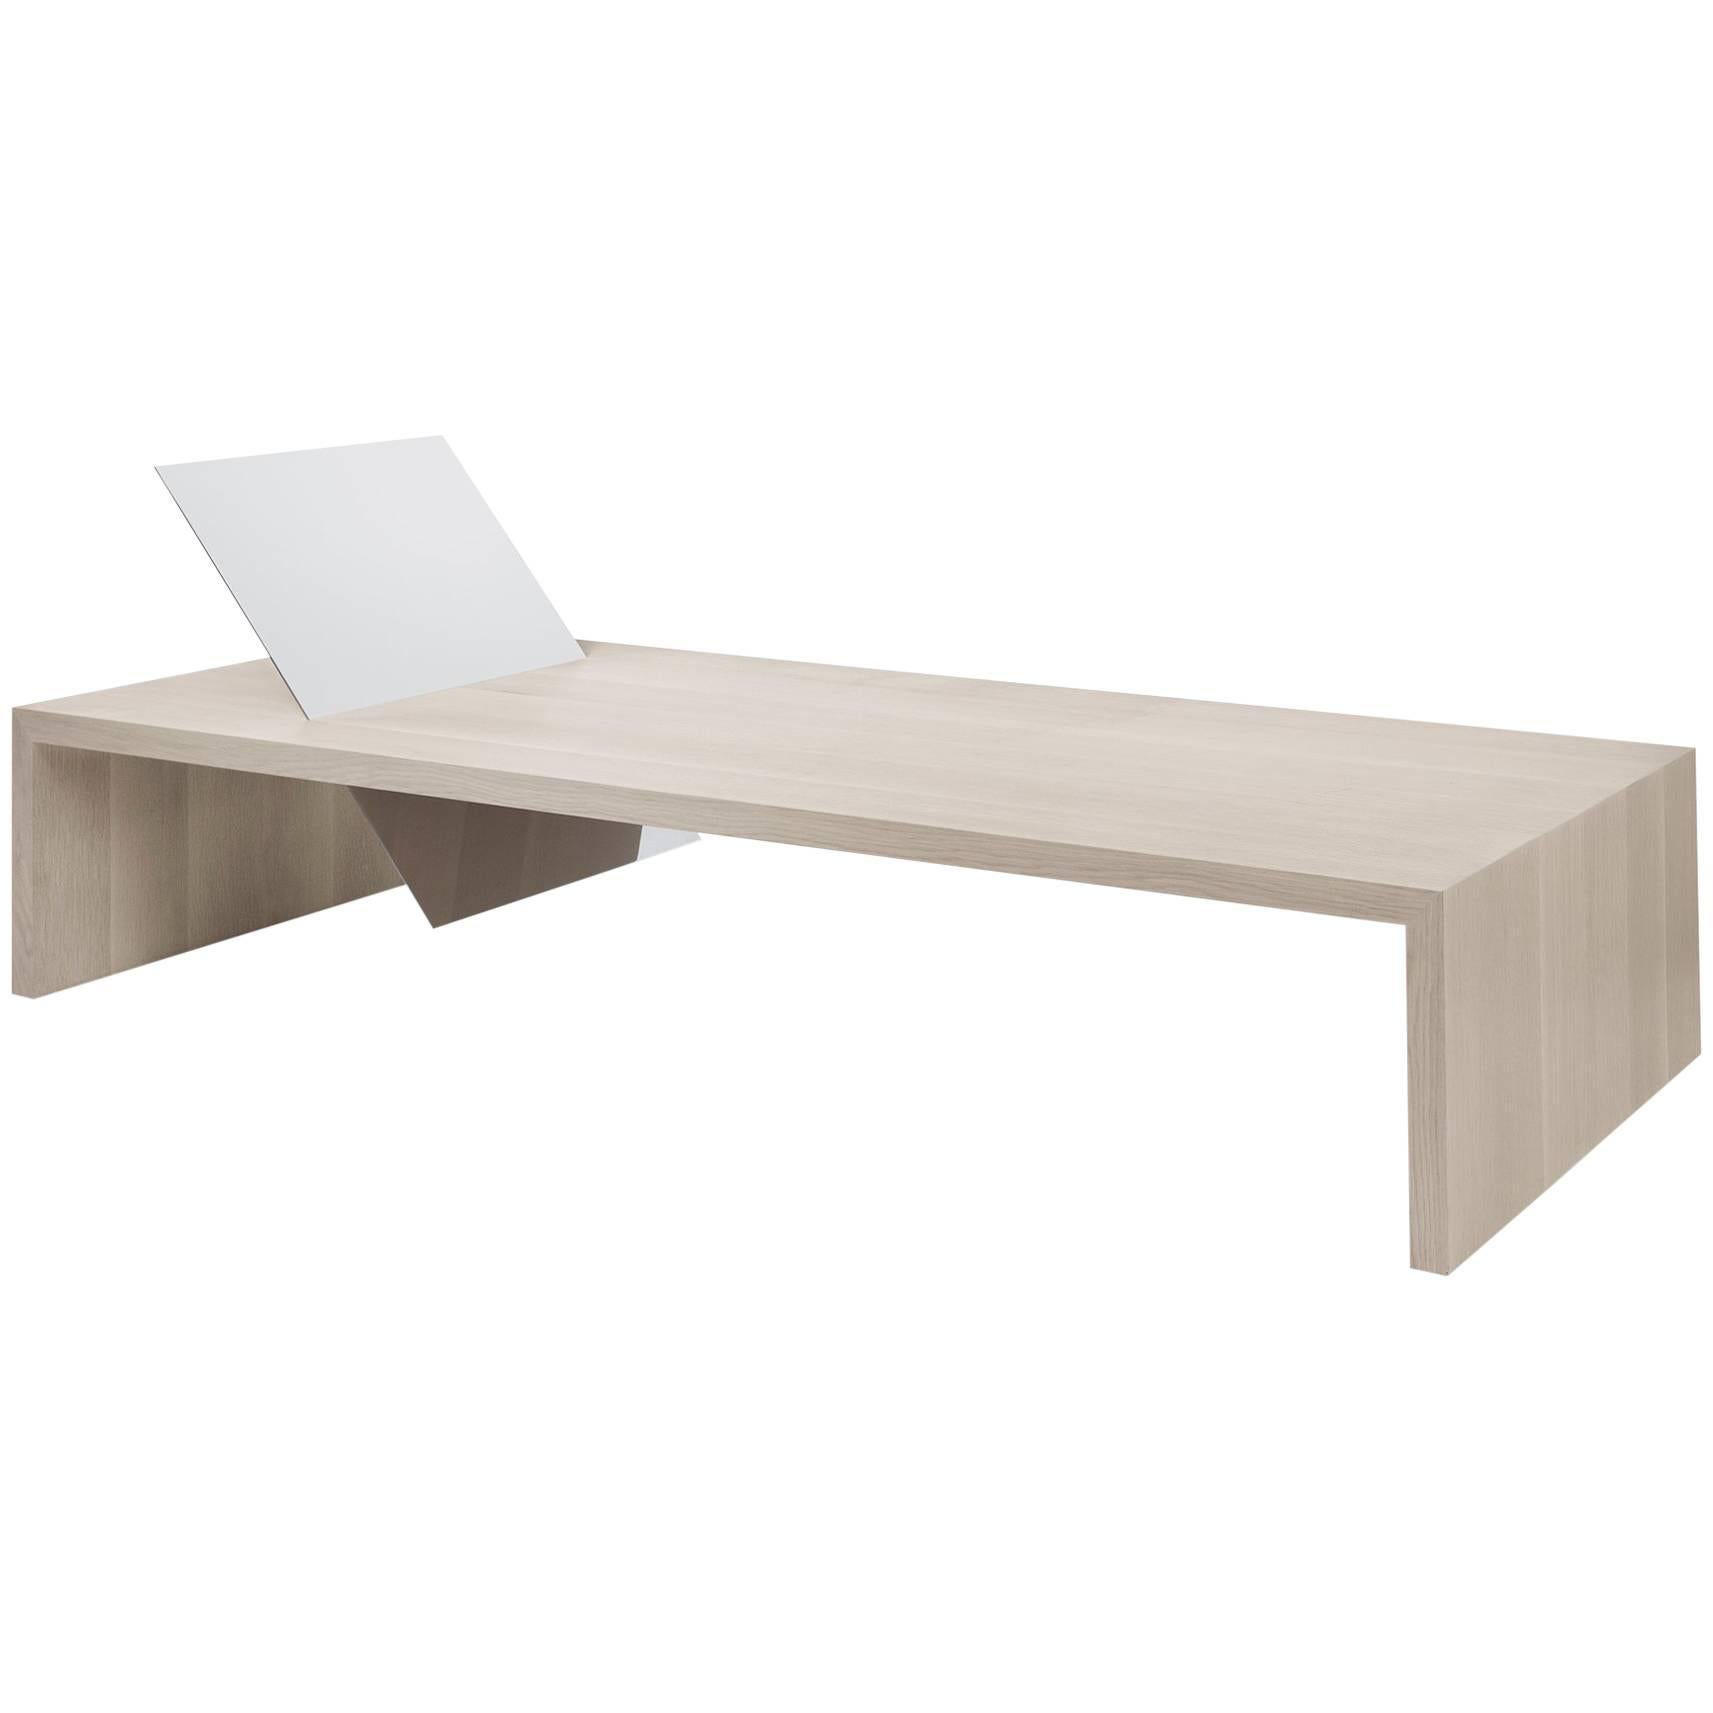 Contemporary Minimal Bleached Oak Daybed Bench Mirror Polish St. Steel Backrest For Sale